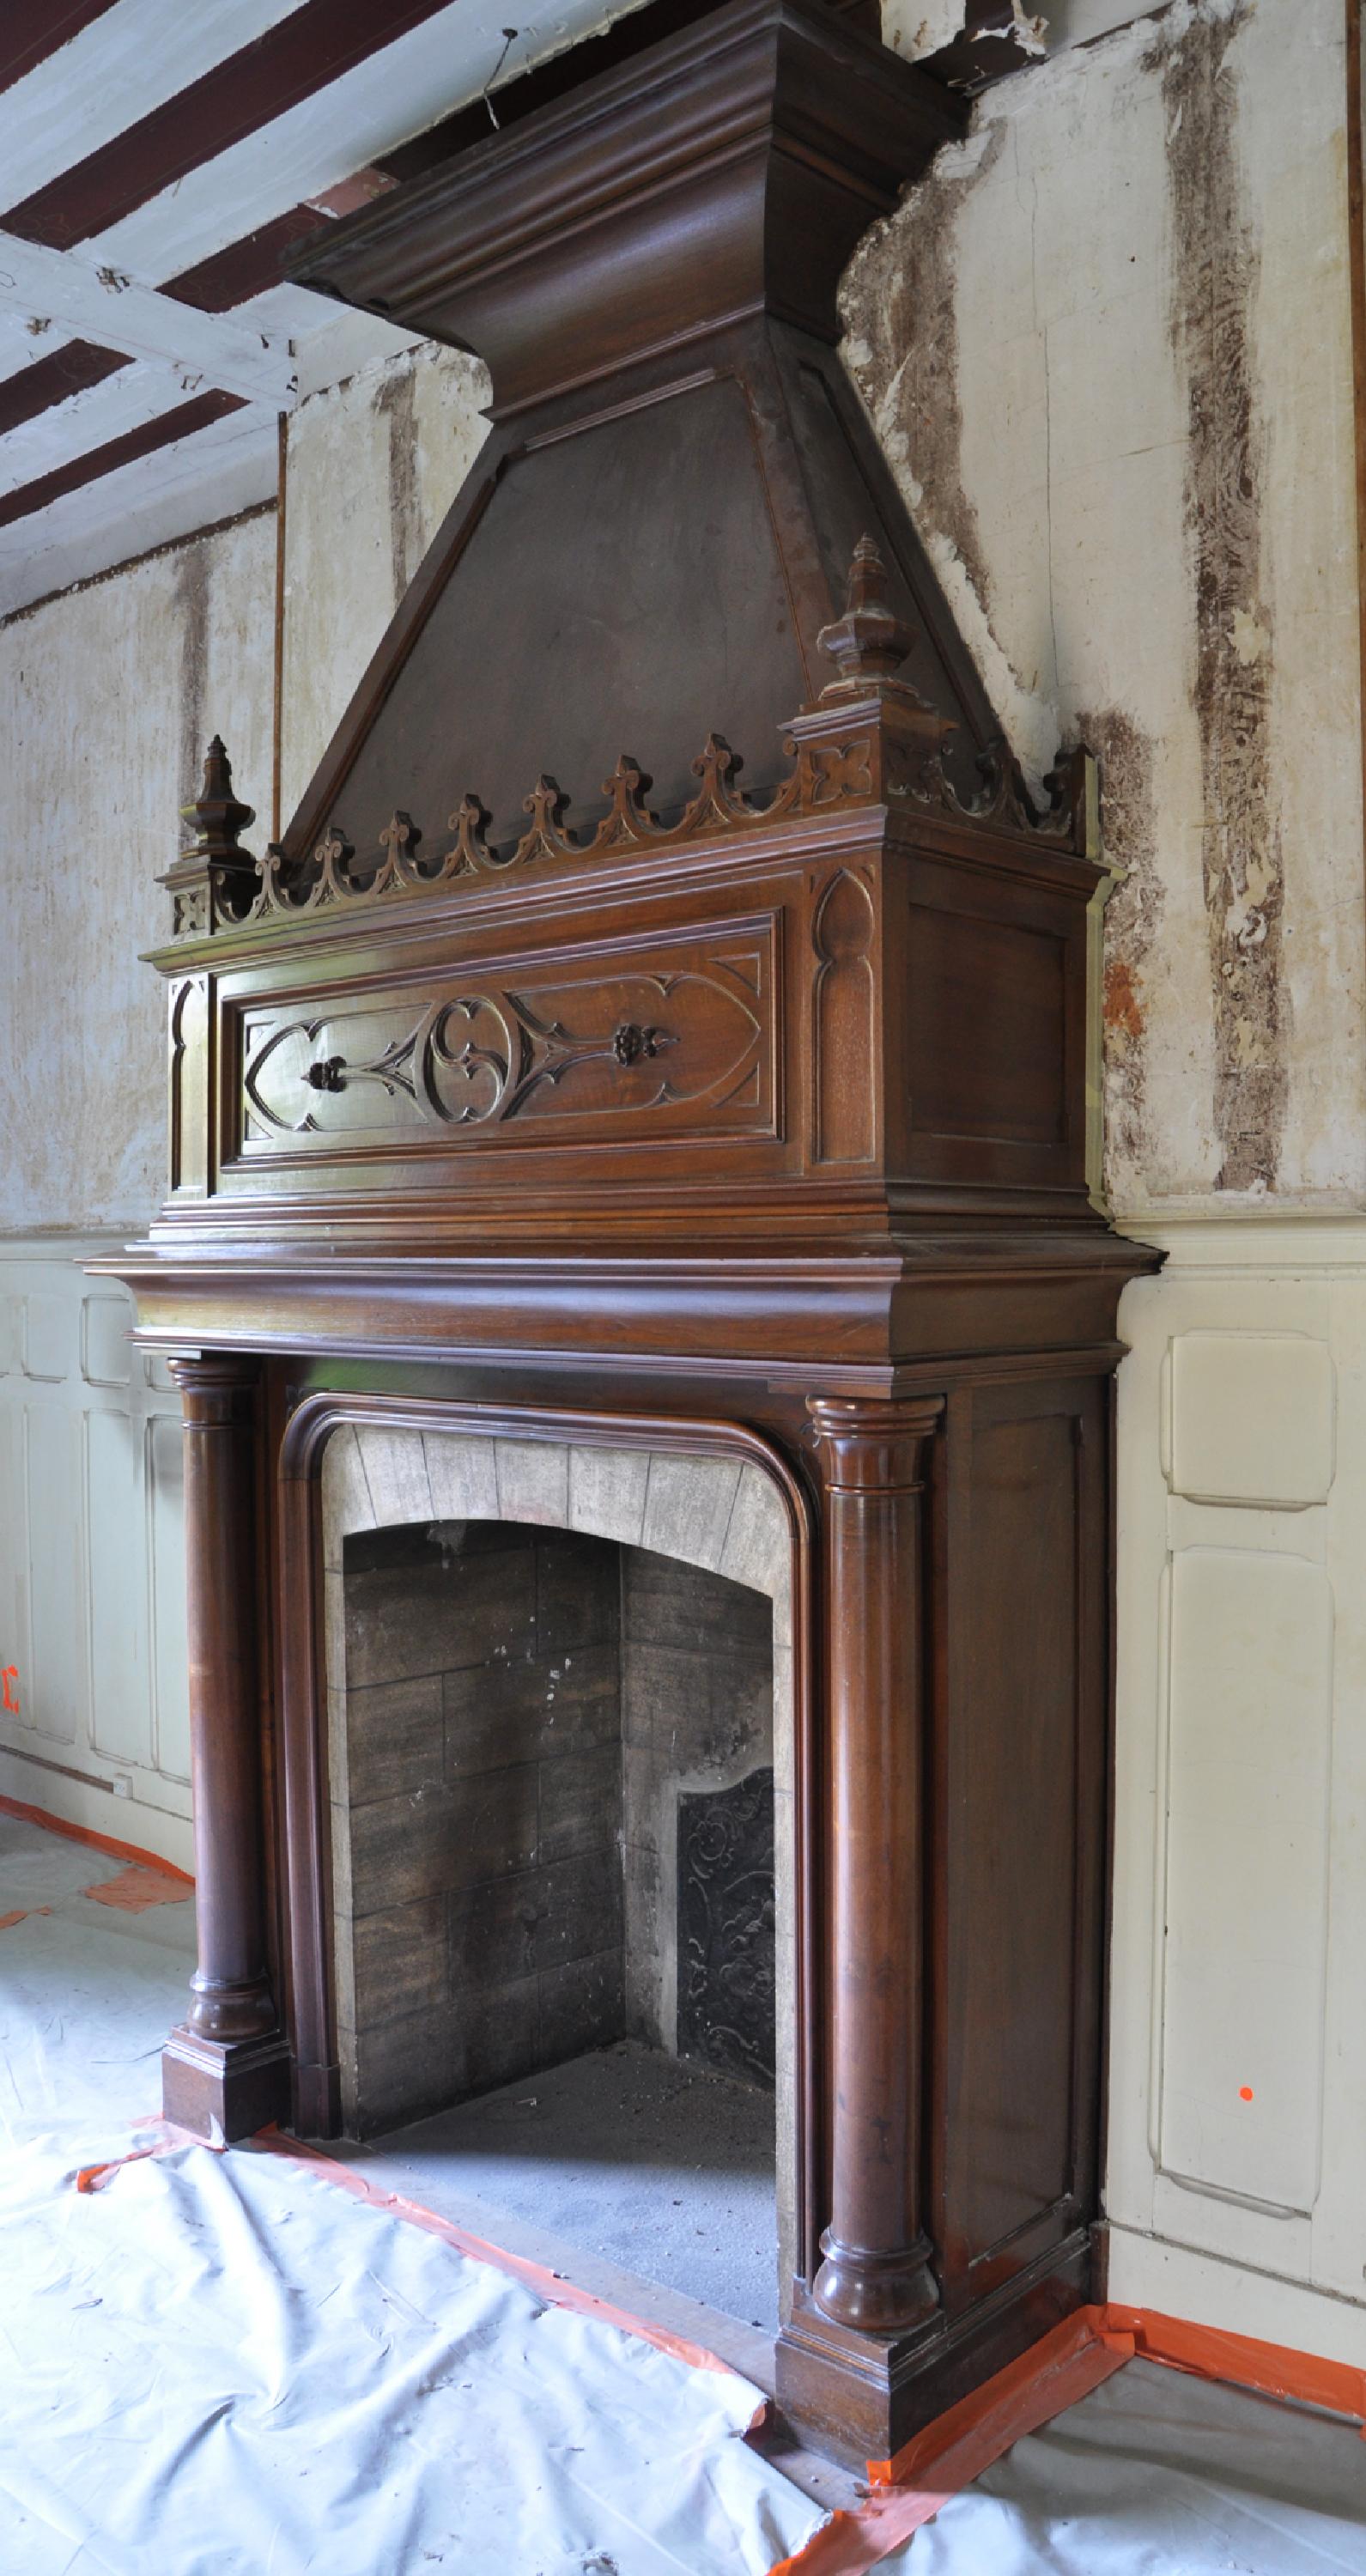 This large Neo-Gothic style fireplace with hood was made at the end of the 19th century out of beautiful walnut wood. The jambs with semi-detached columns support a wide entablature. The carved decoration of the entablature is typical of the